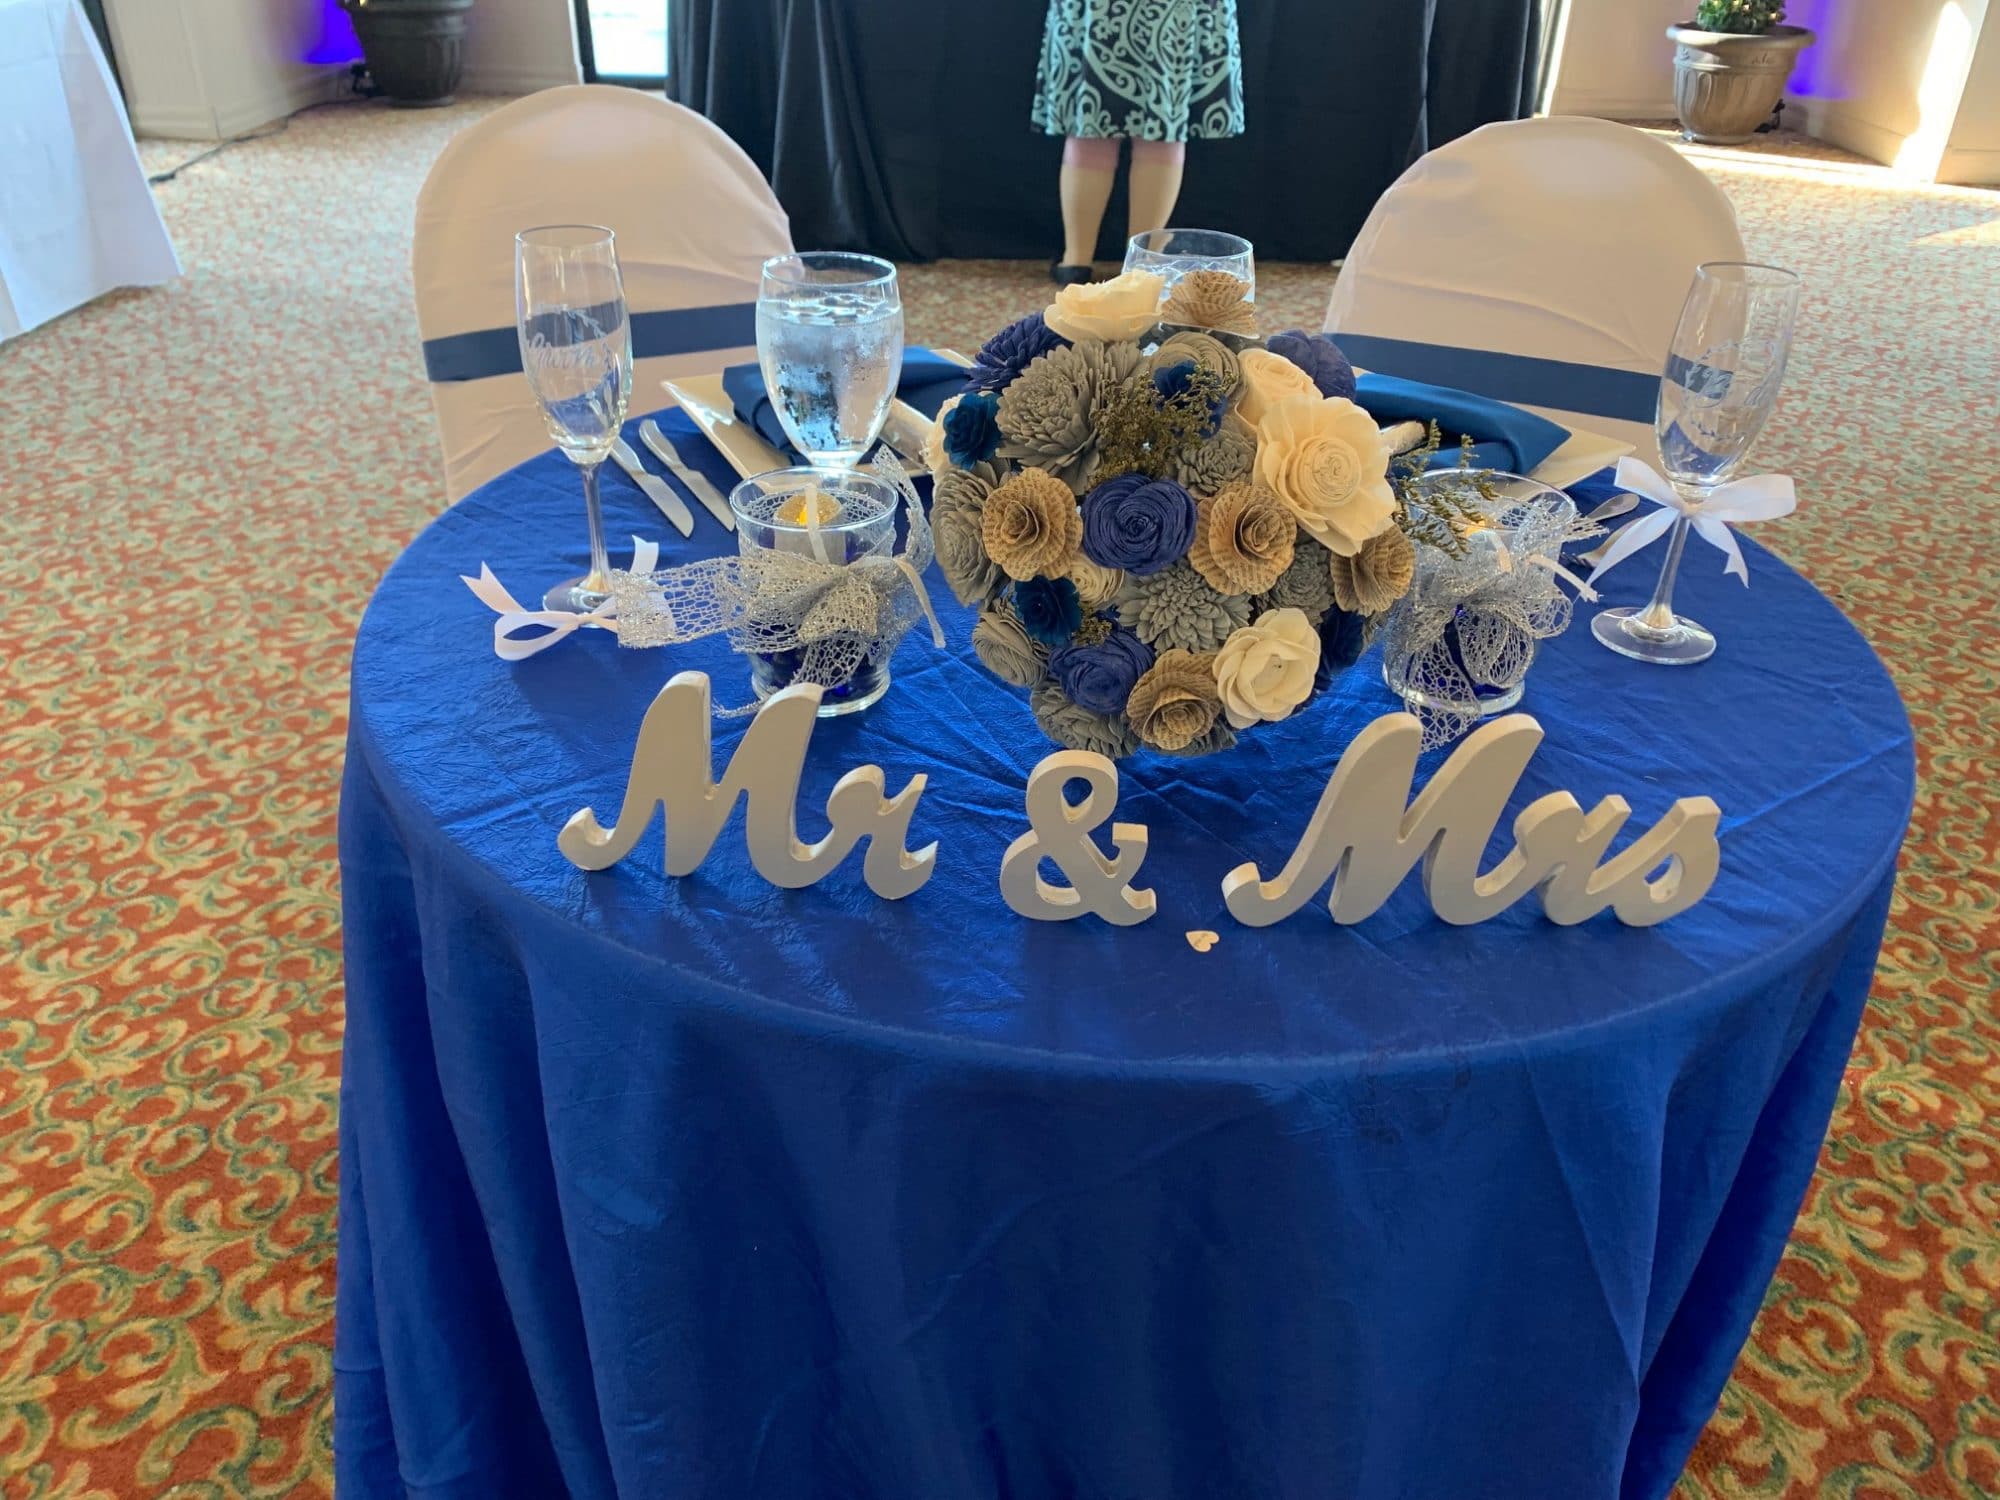 Mr. and Mrs. on blue tablecloth